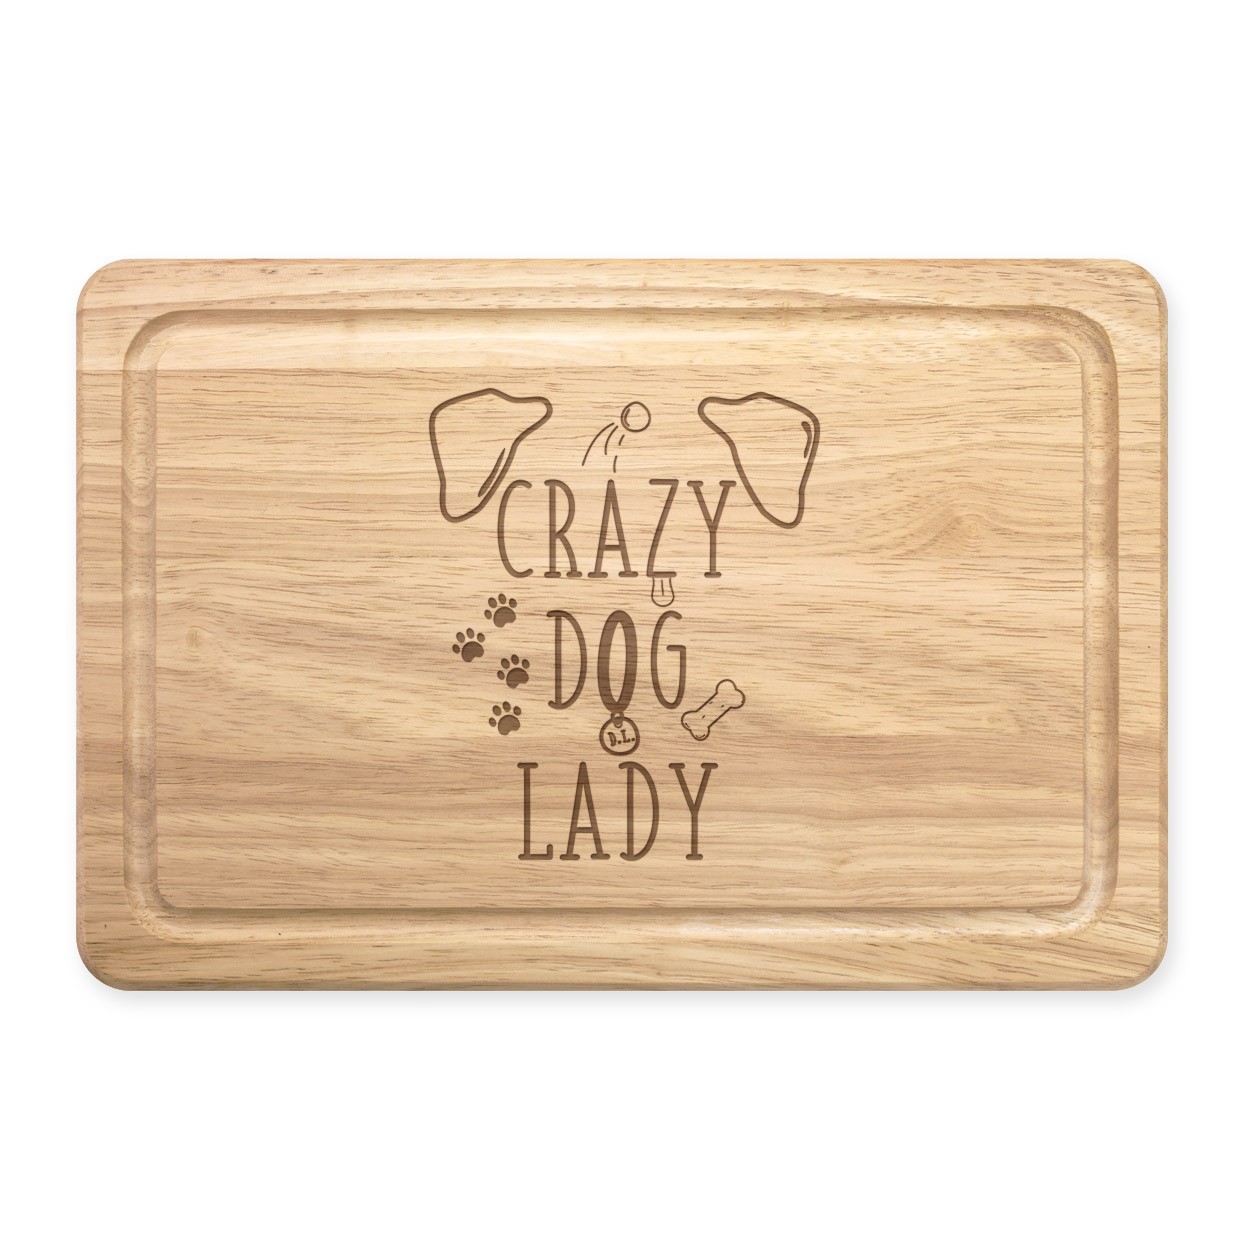 Crazy Dog Lady Brown Ears Rectangular Wooden Chopping Board